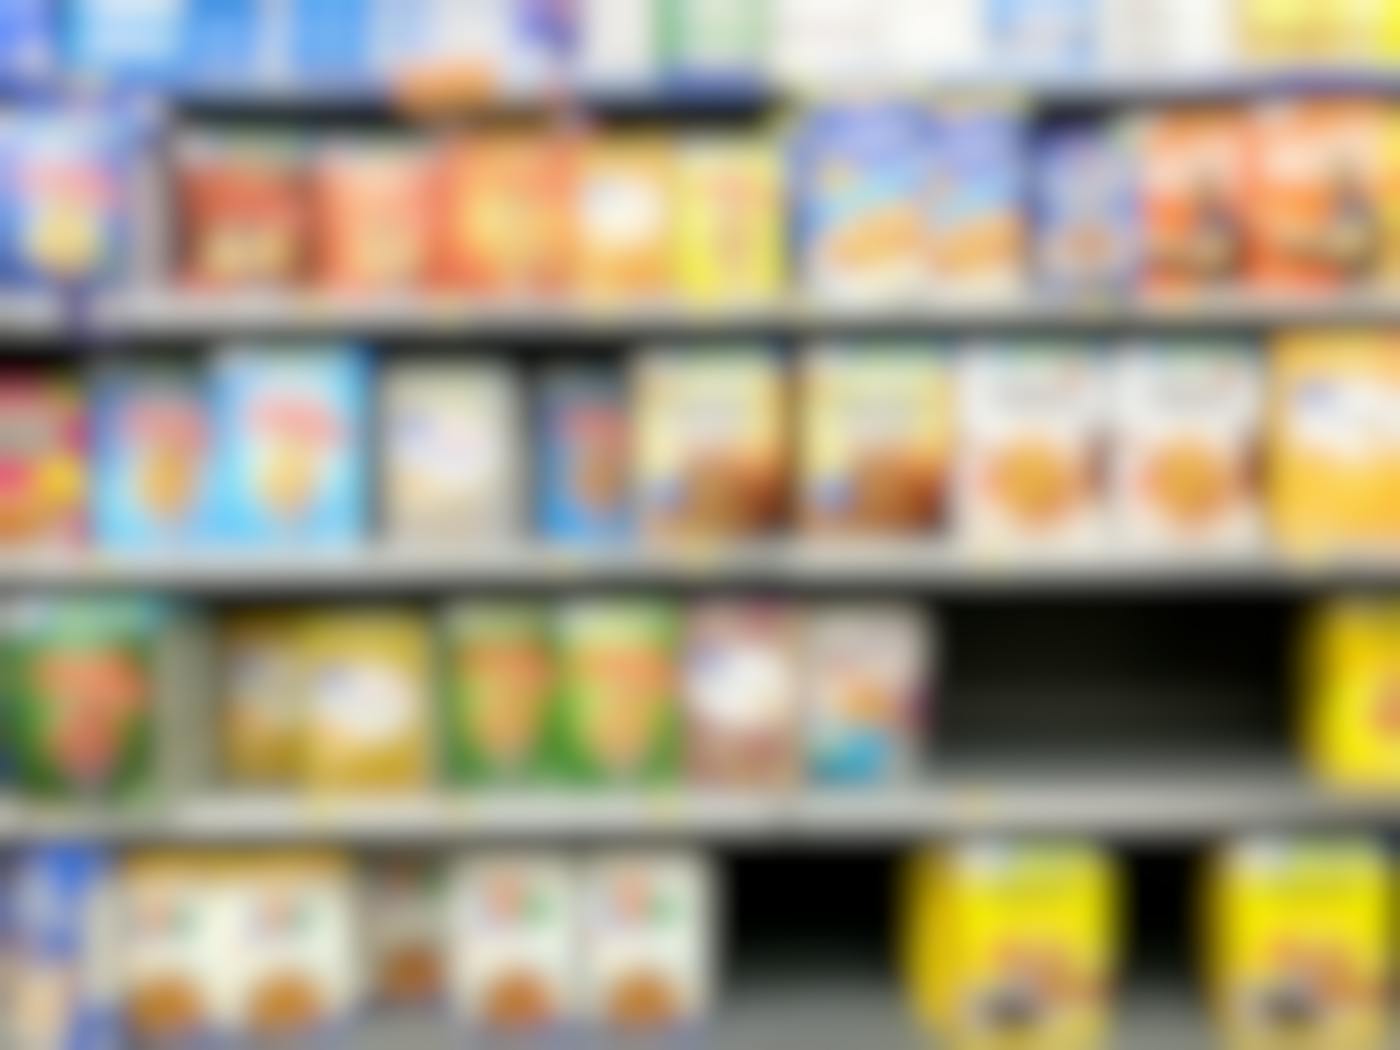 Shelves full of "healthy" cereals